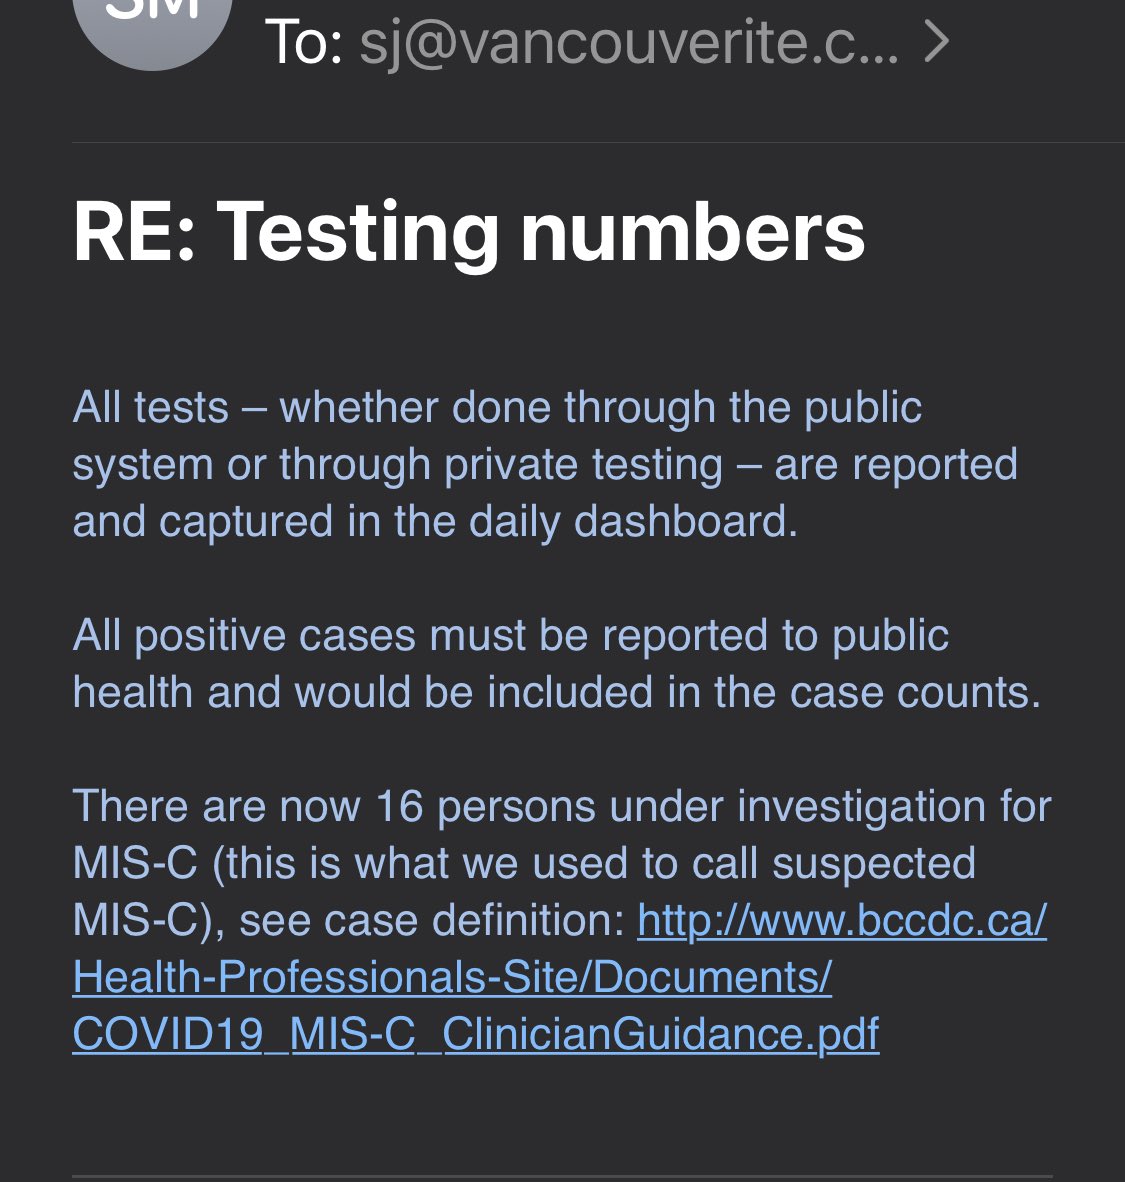 The way BC has misled citizens is adding thousands of private film testing carried out on asymptomatic crew. Same people tested over and over. This helps create a mirage of higher testing and lower positivity. Ministry of Health email 5/7